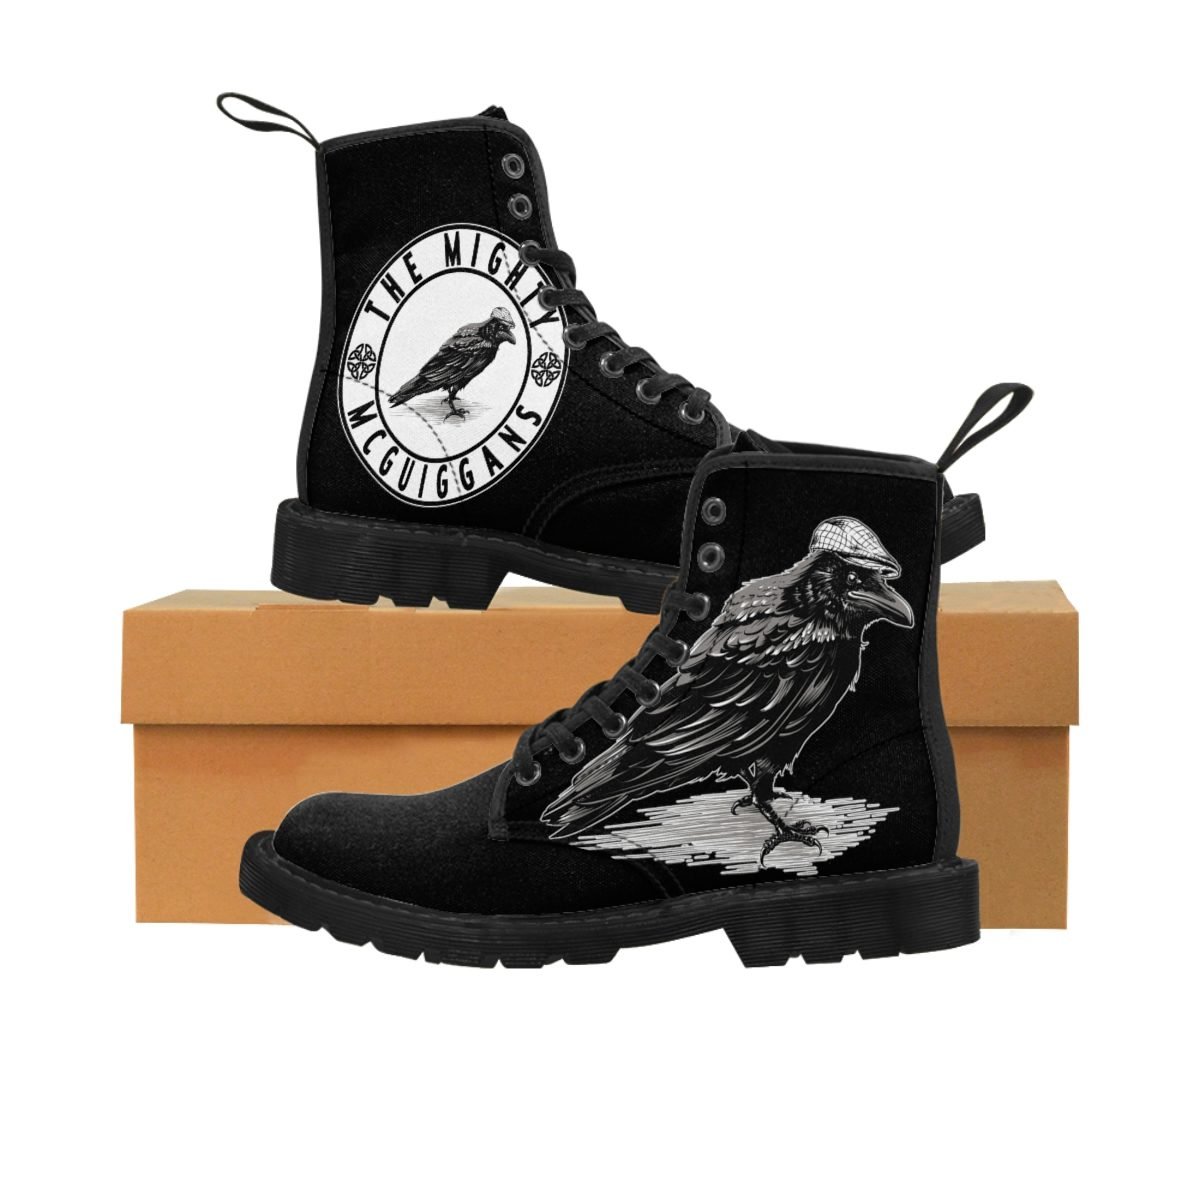 The Mighty McGuiggans BW Logo Women’s Canvas Boots